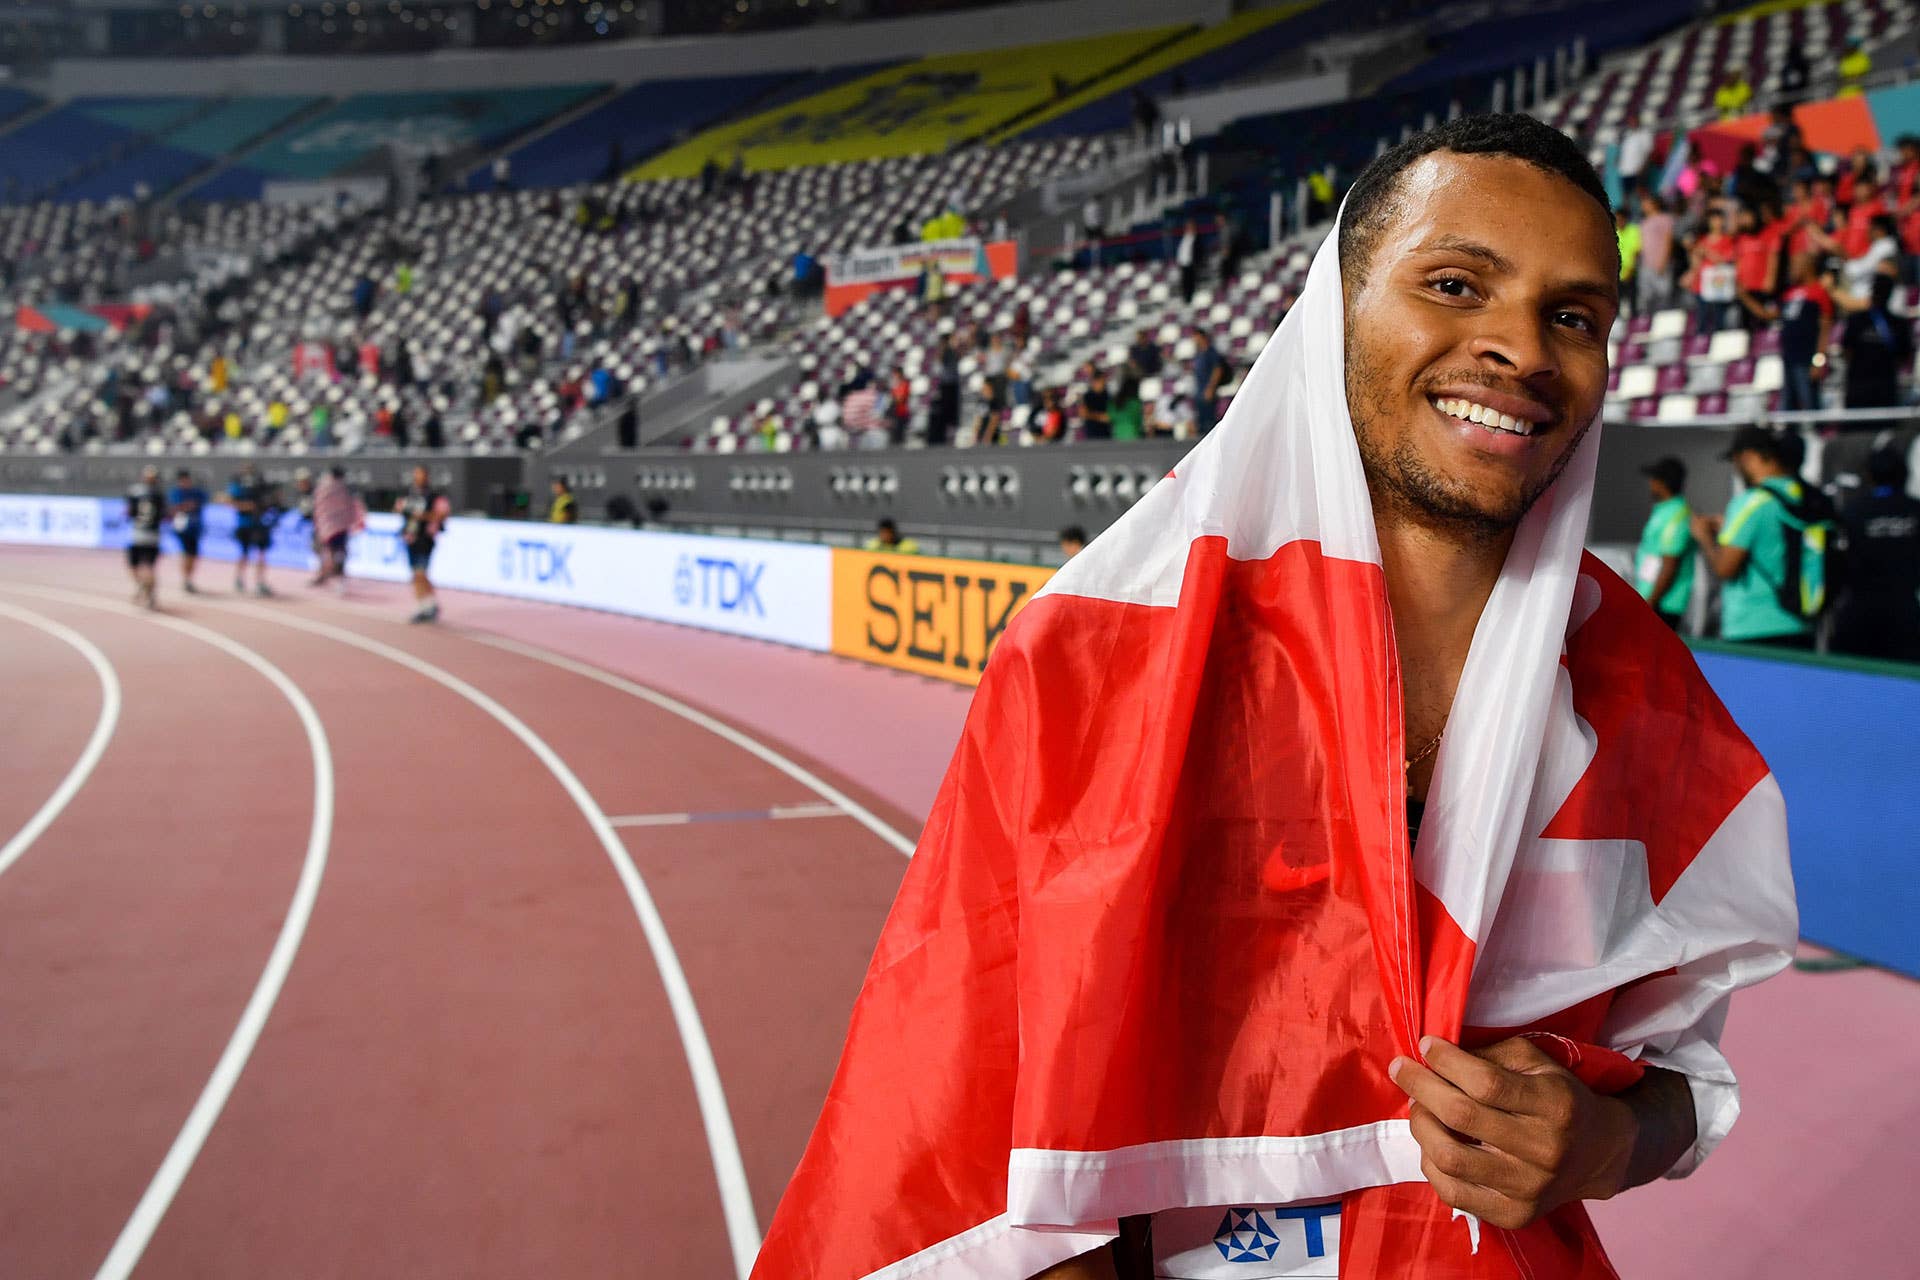 Canada's Andre De Grasse celebrates taking silver in the Men's 200m final at the 2019 IAAF Athletics World Championships at the Khalifa International stadium in Doha on October 1, 2019.